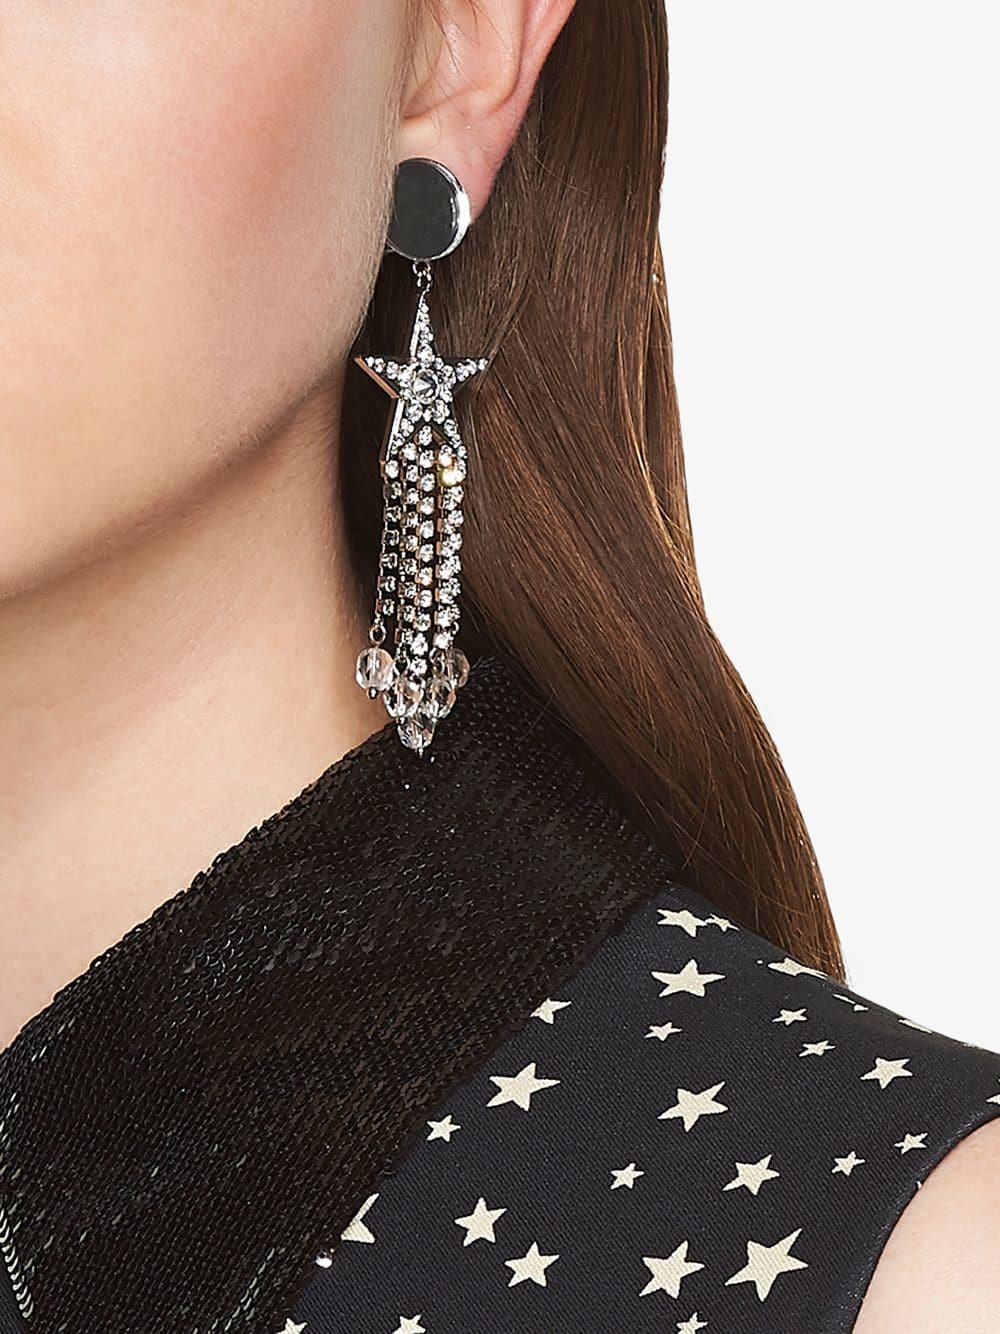 miu miu STAR EARRINGS available on montiboutique.com - 26255